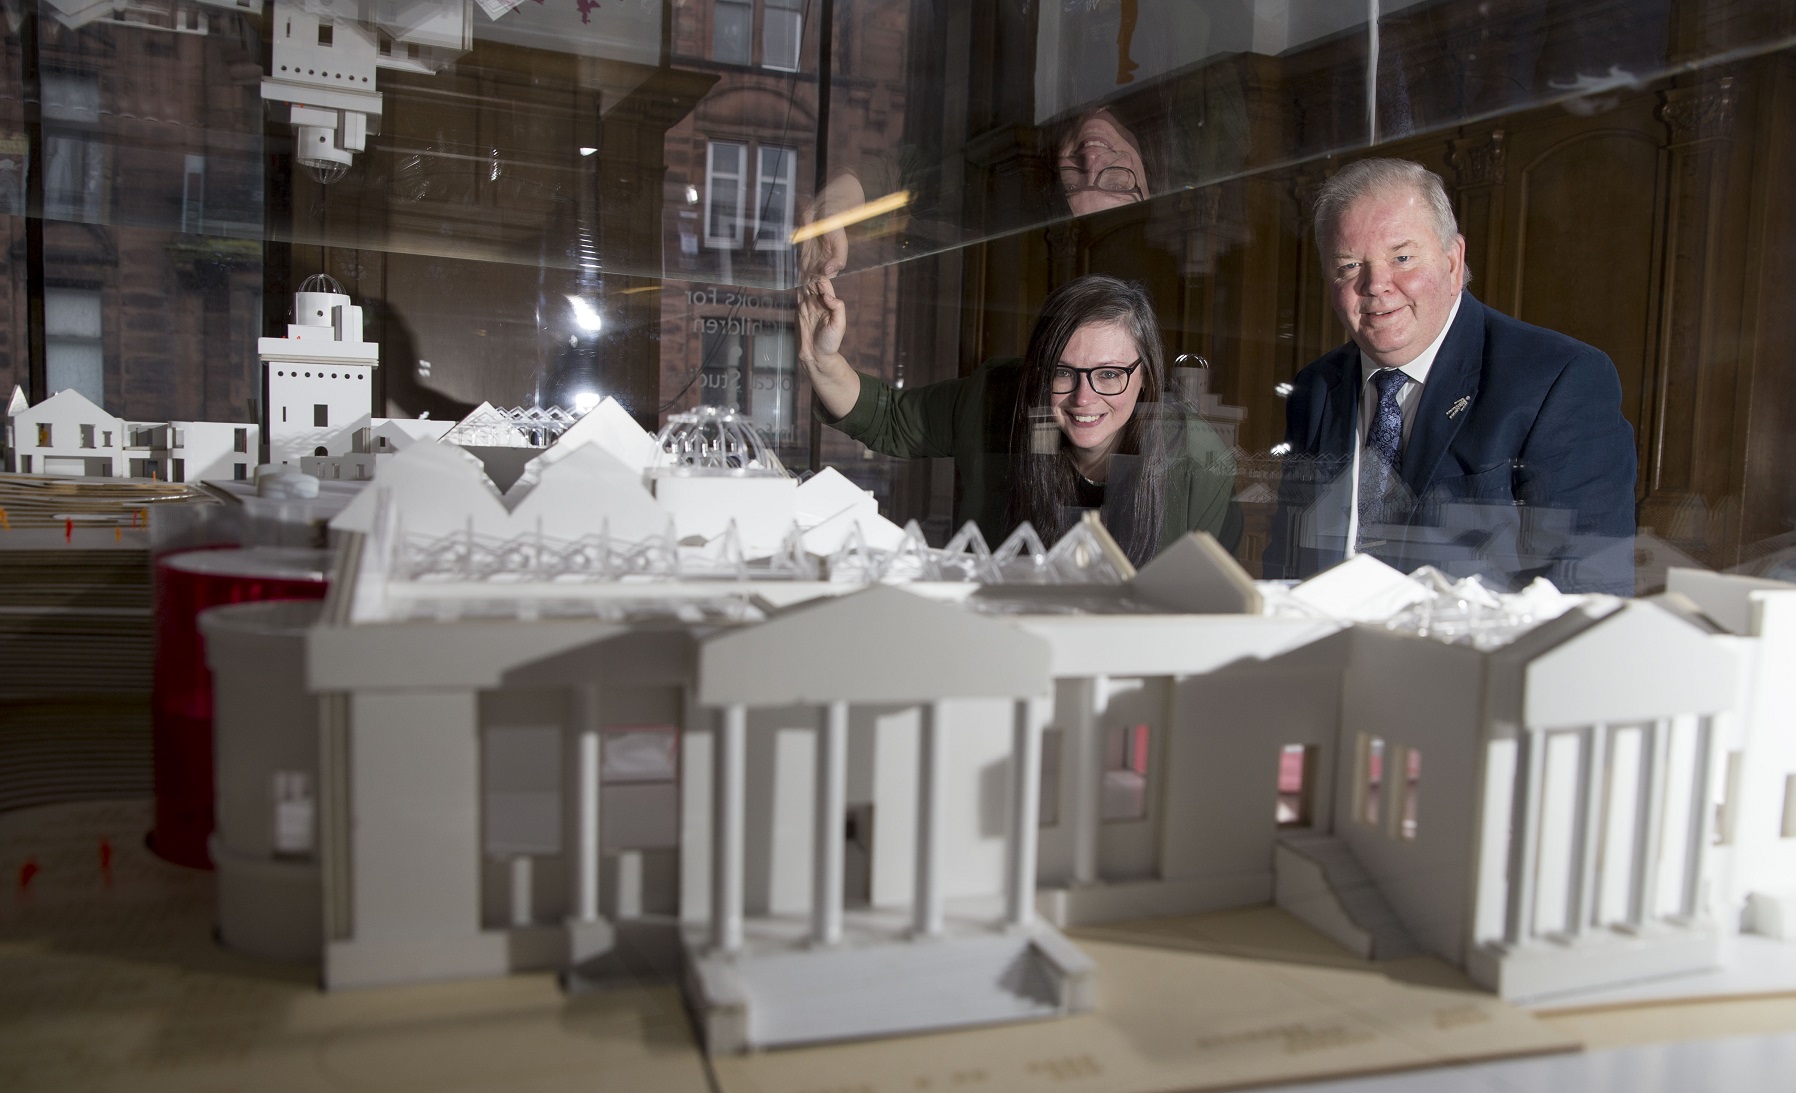 AL_A’s reimagination of Paisley Museum gets £3.8m lottery funding boost